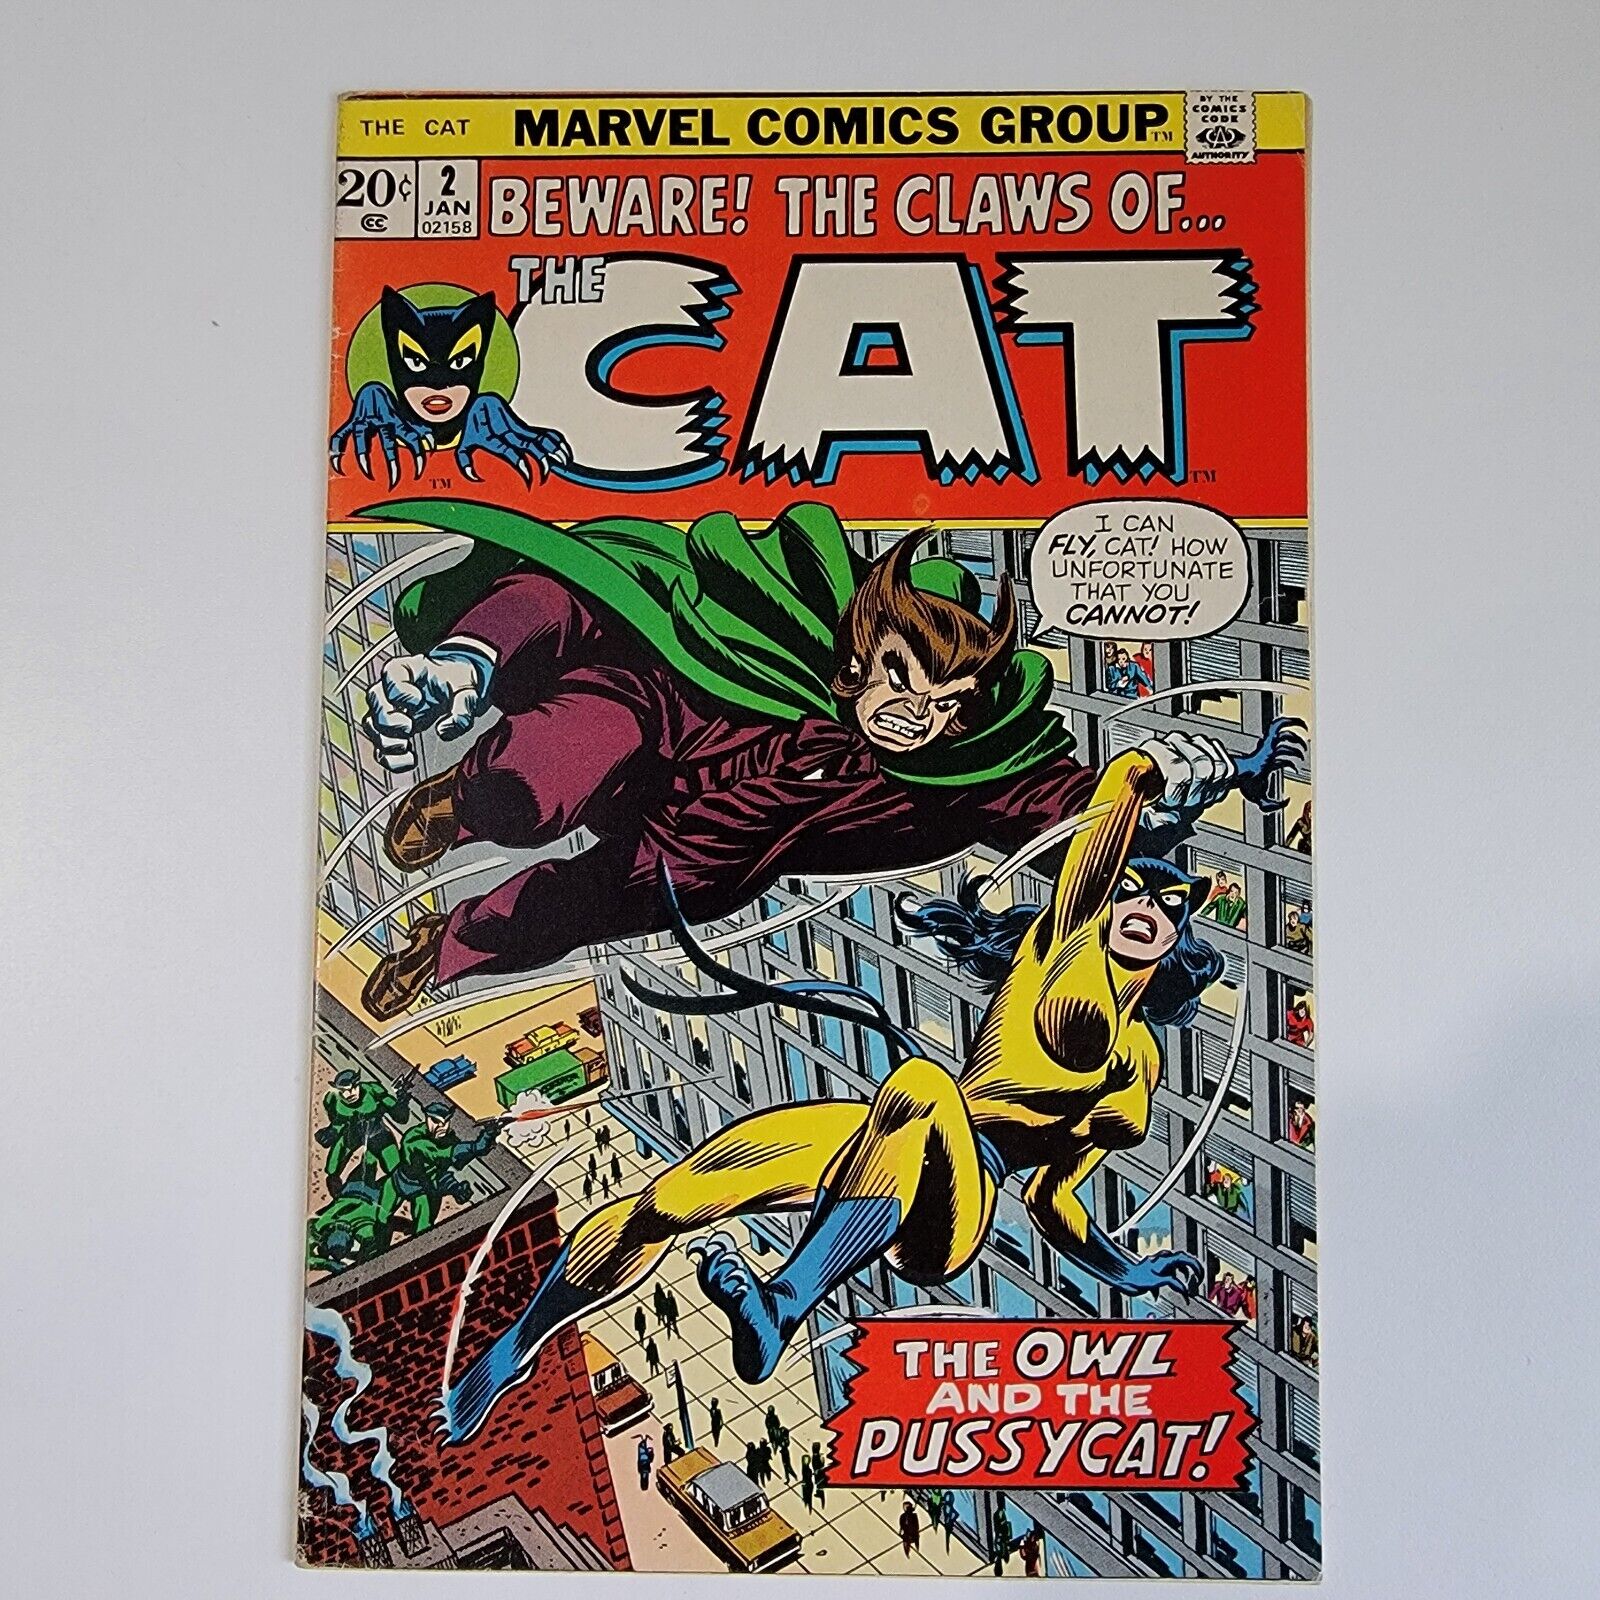 The Cat #2 Marvel Comics 1973 The Owl and the Pussycat